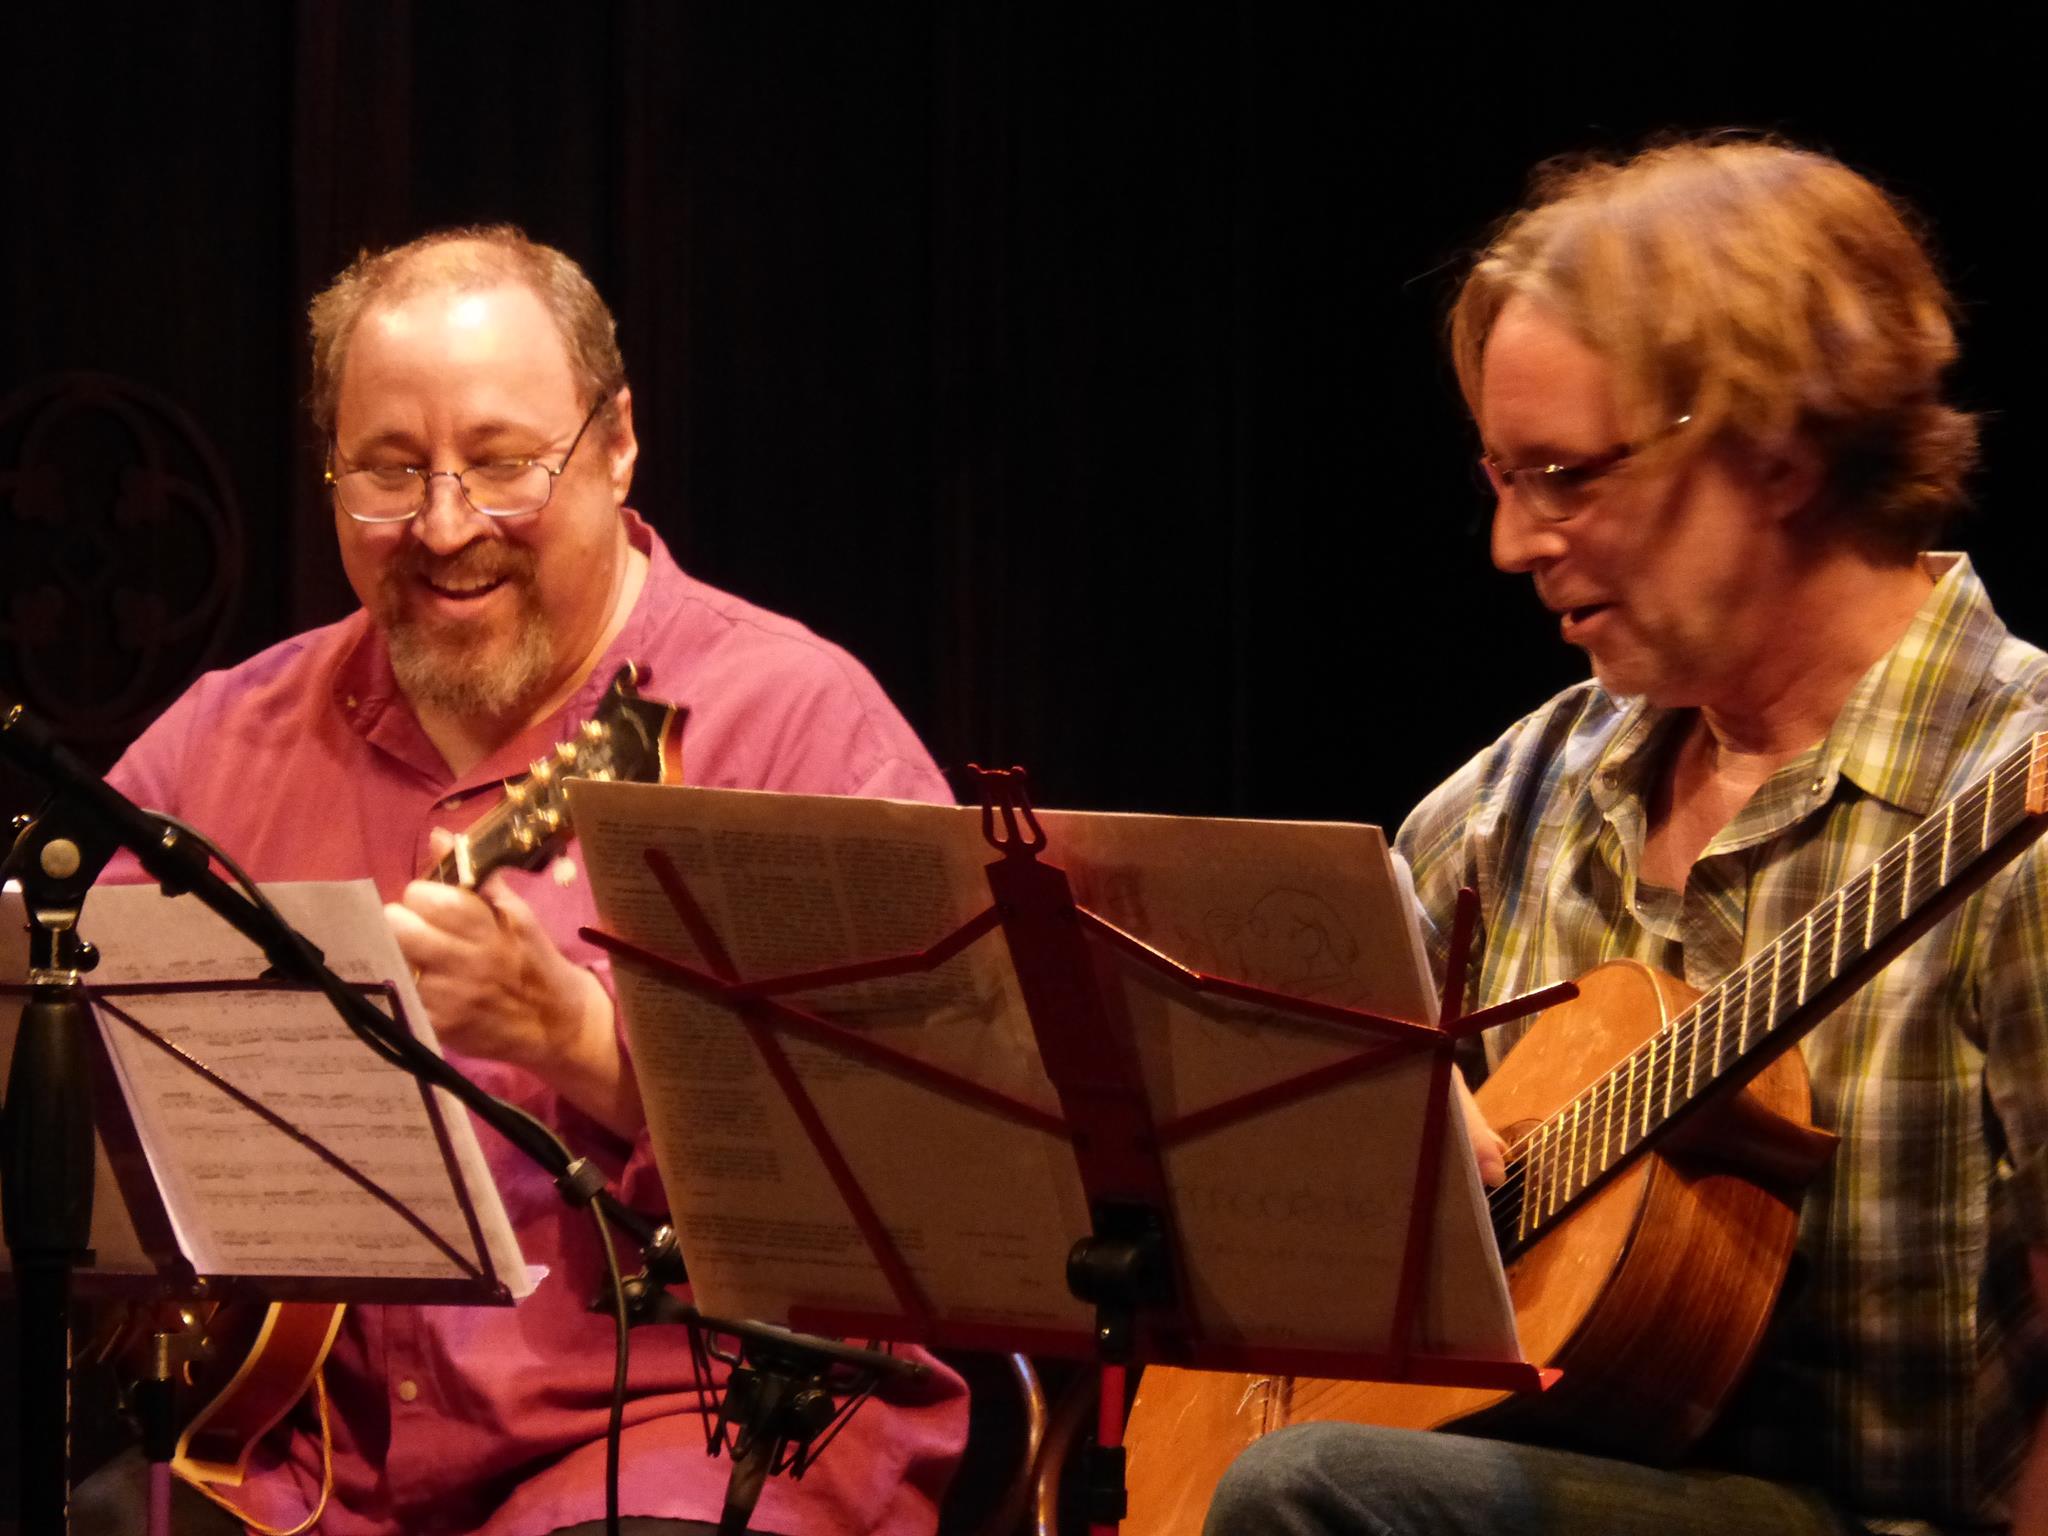  With Christopher Colucci playing classical music (!) for a concert at the Peoples Light and Theatre Company in Malvern, PA. August 2014. 